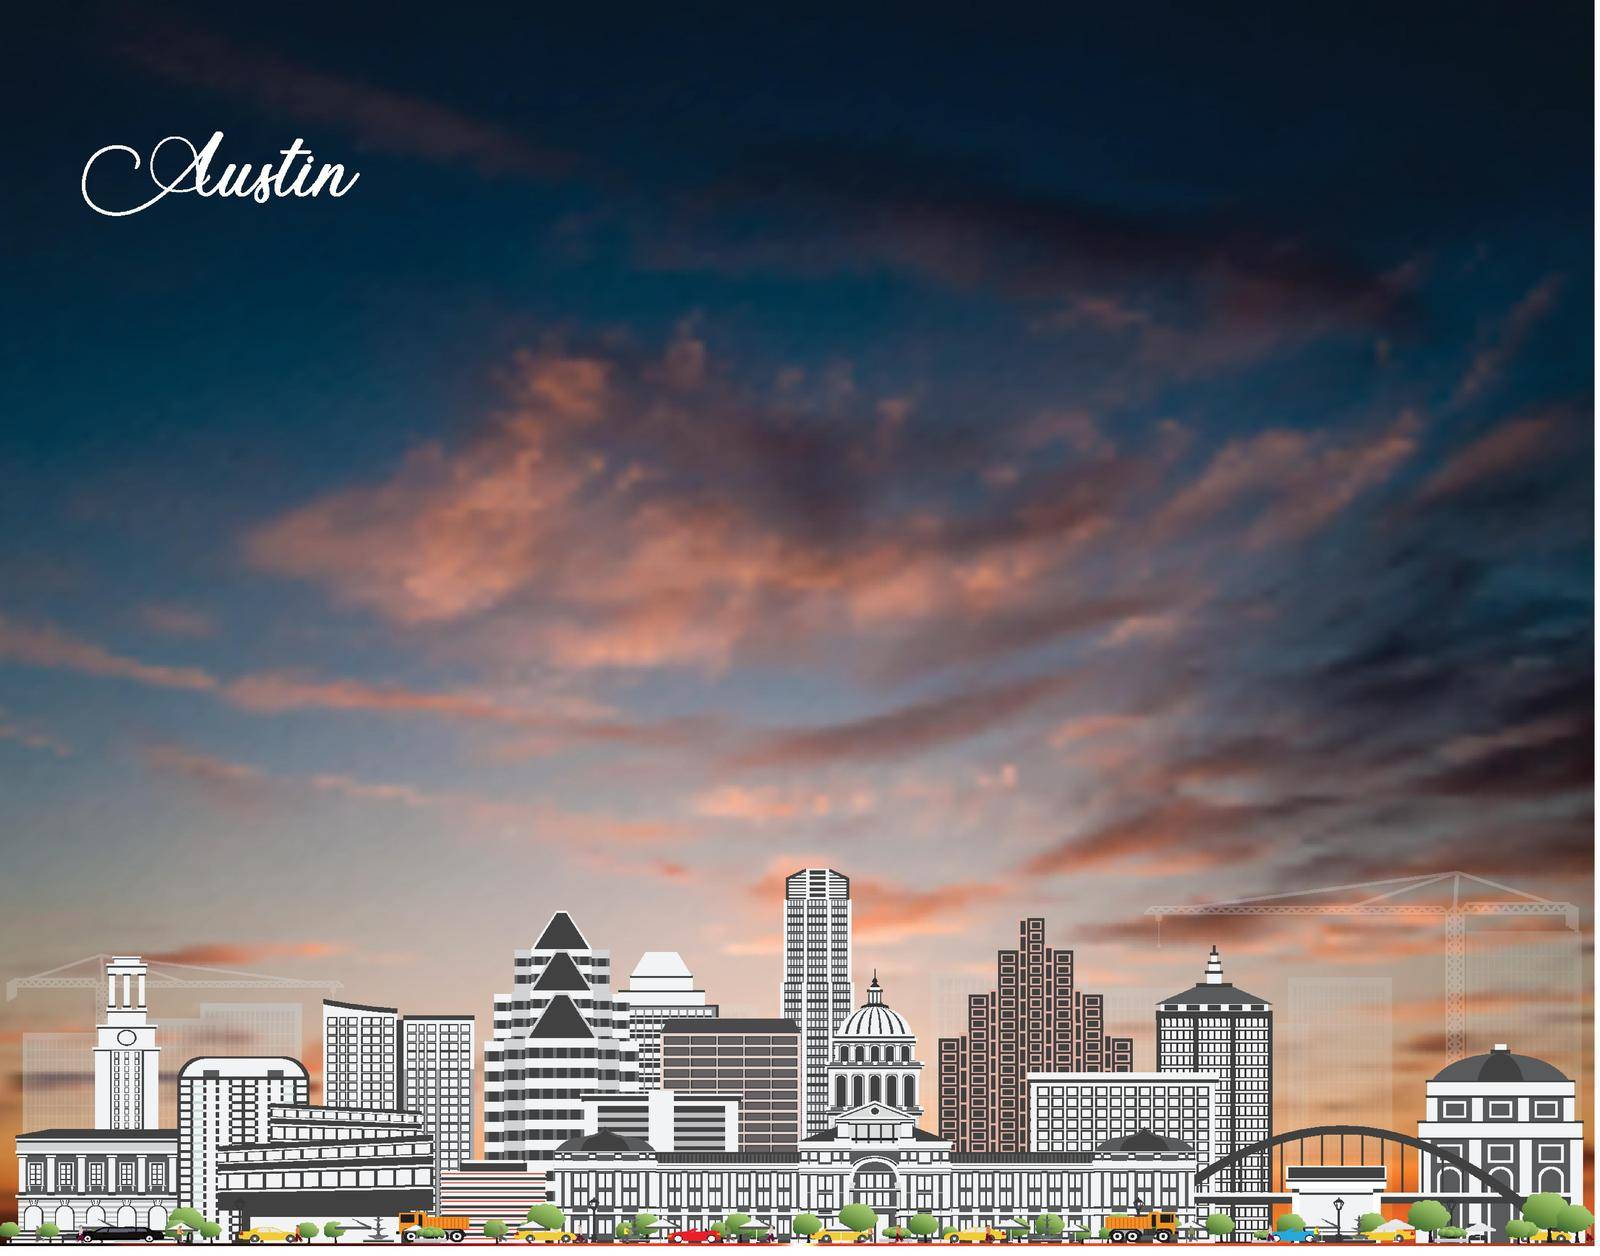 you can use Austin city landscape vectors to design banners, posters, backgrounds,..etc.